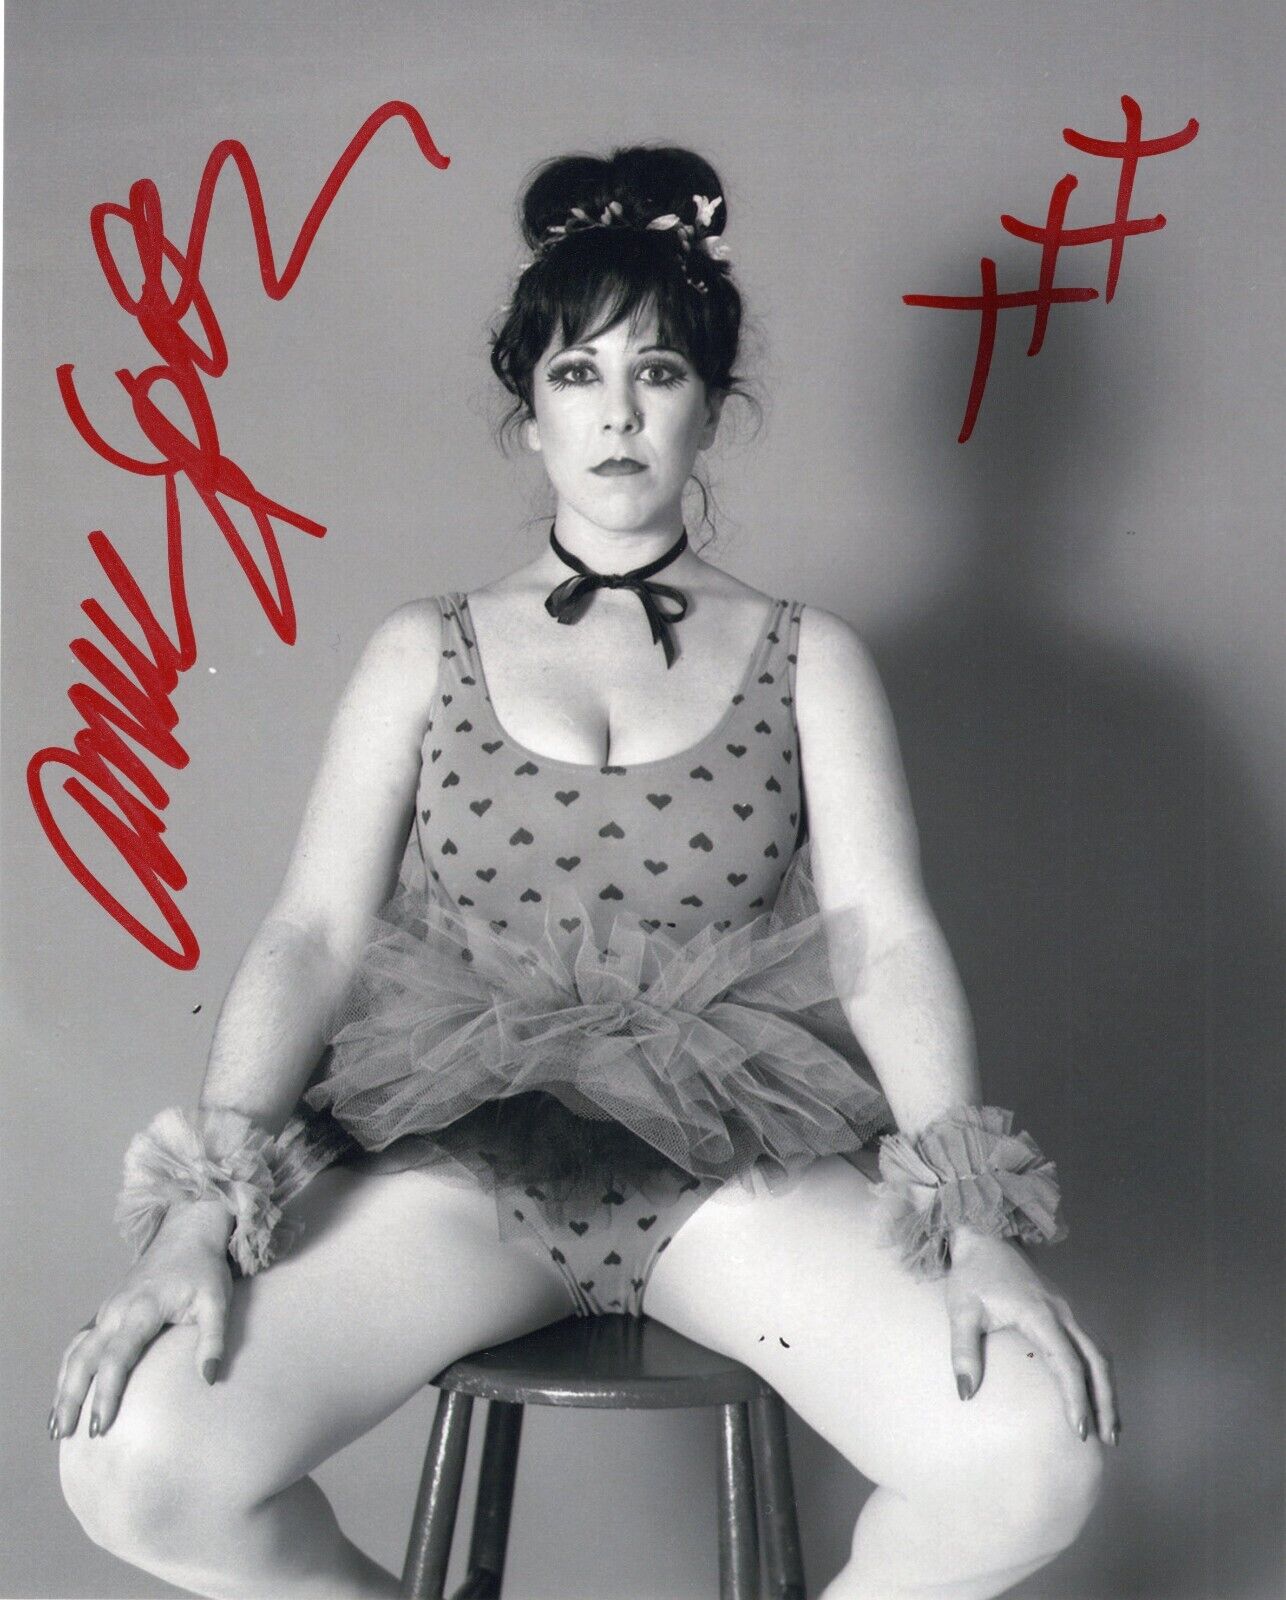 Annie Sprinkle signed Adult Film Star model 8x10 photo autographed